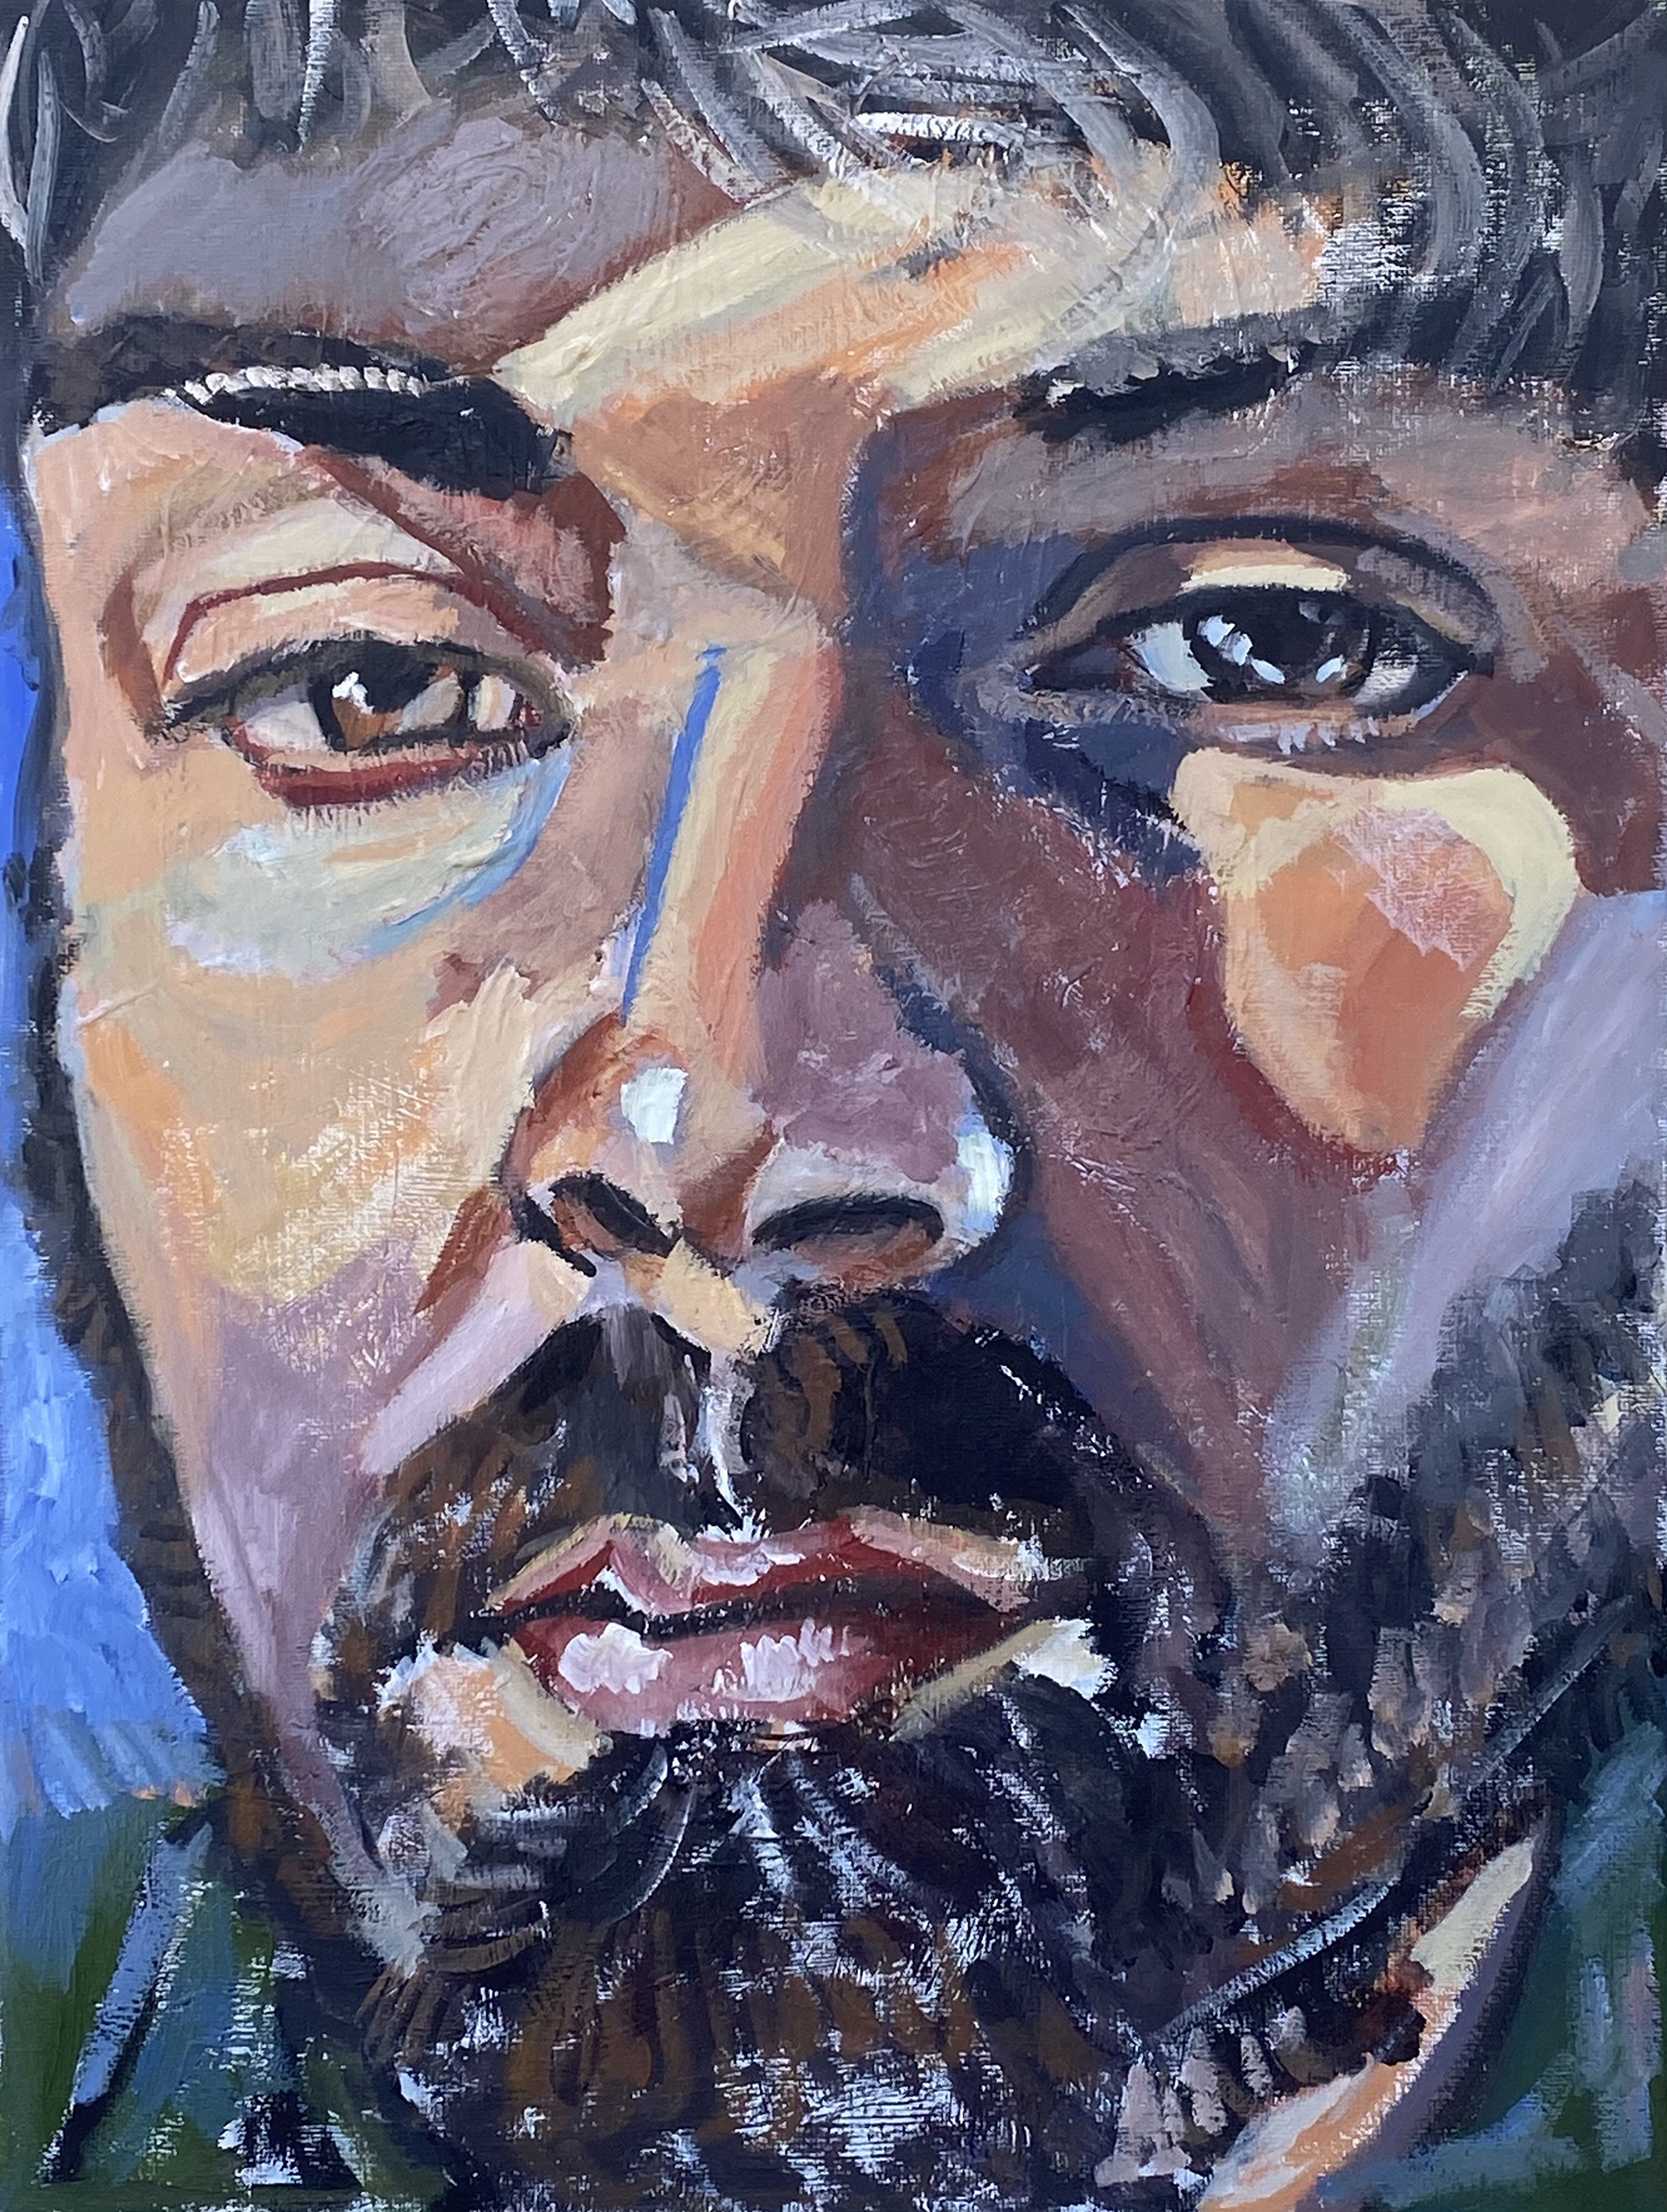 Self Portrait (January) oil and acrylic painting on canvas by Chris Zak.